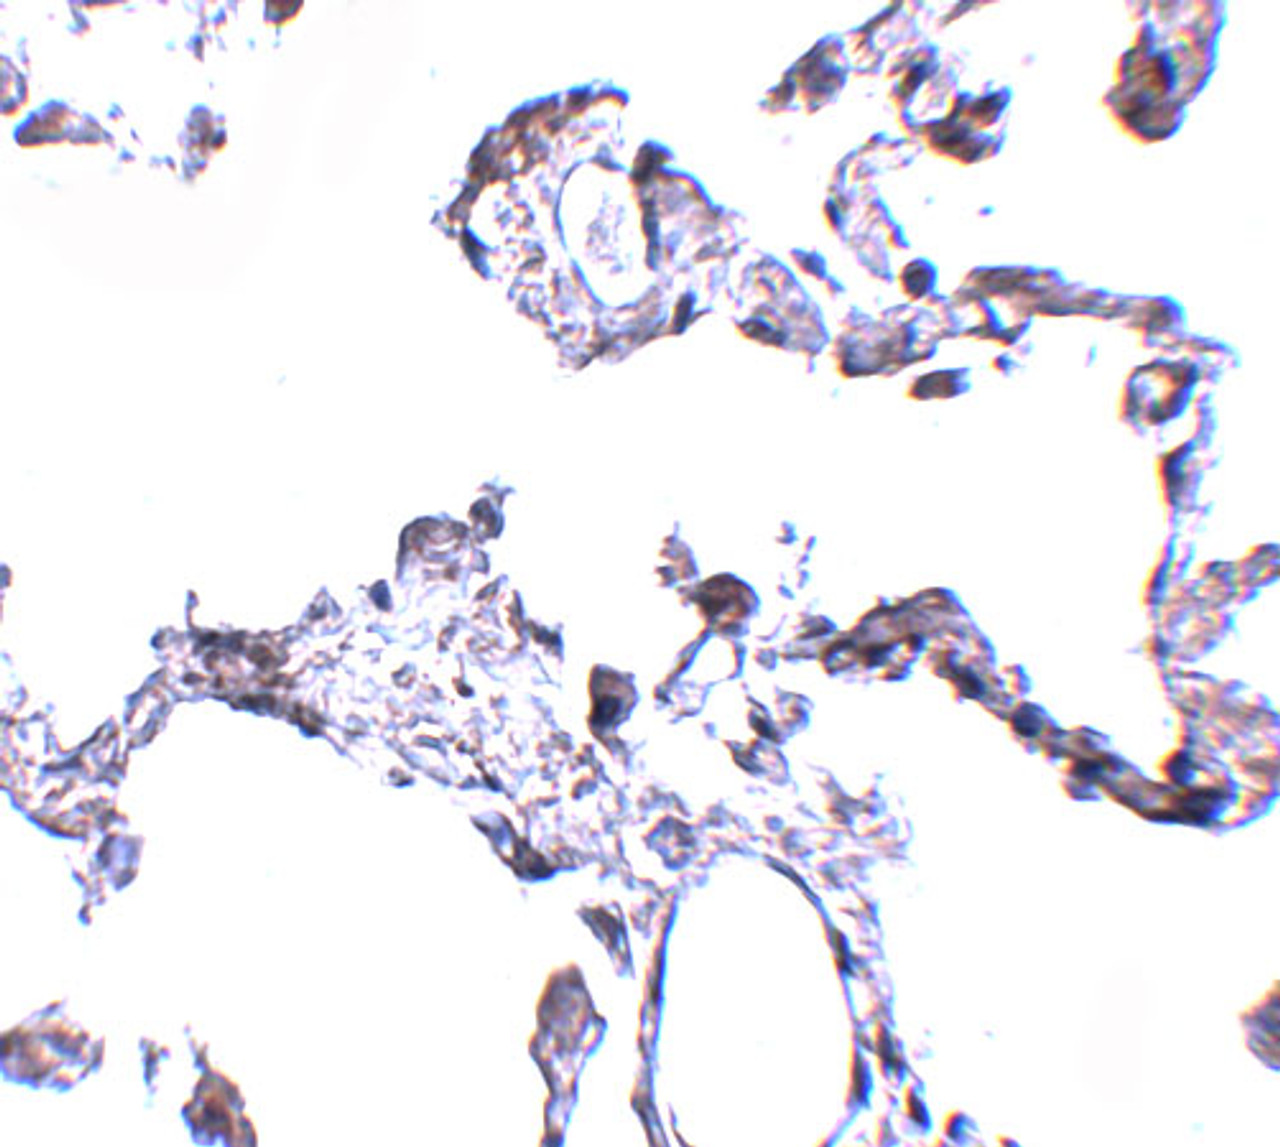 Immunohistochemistry of CD81 in human lung tissue with CD81 antibody at 5 ug/mL.